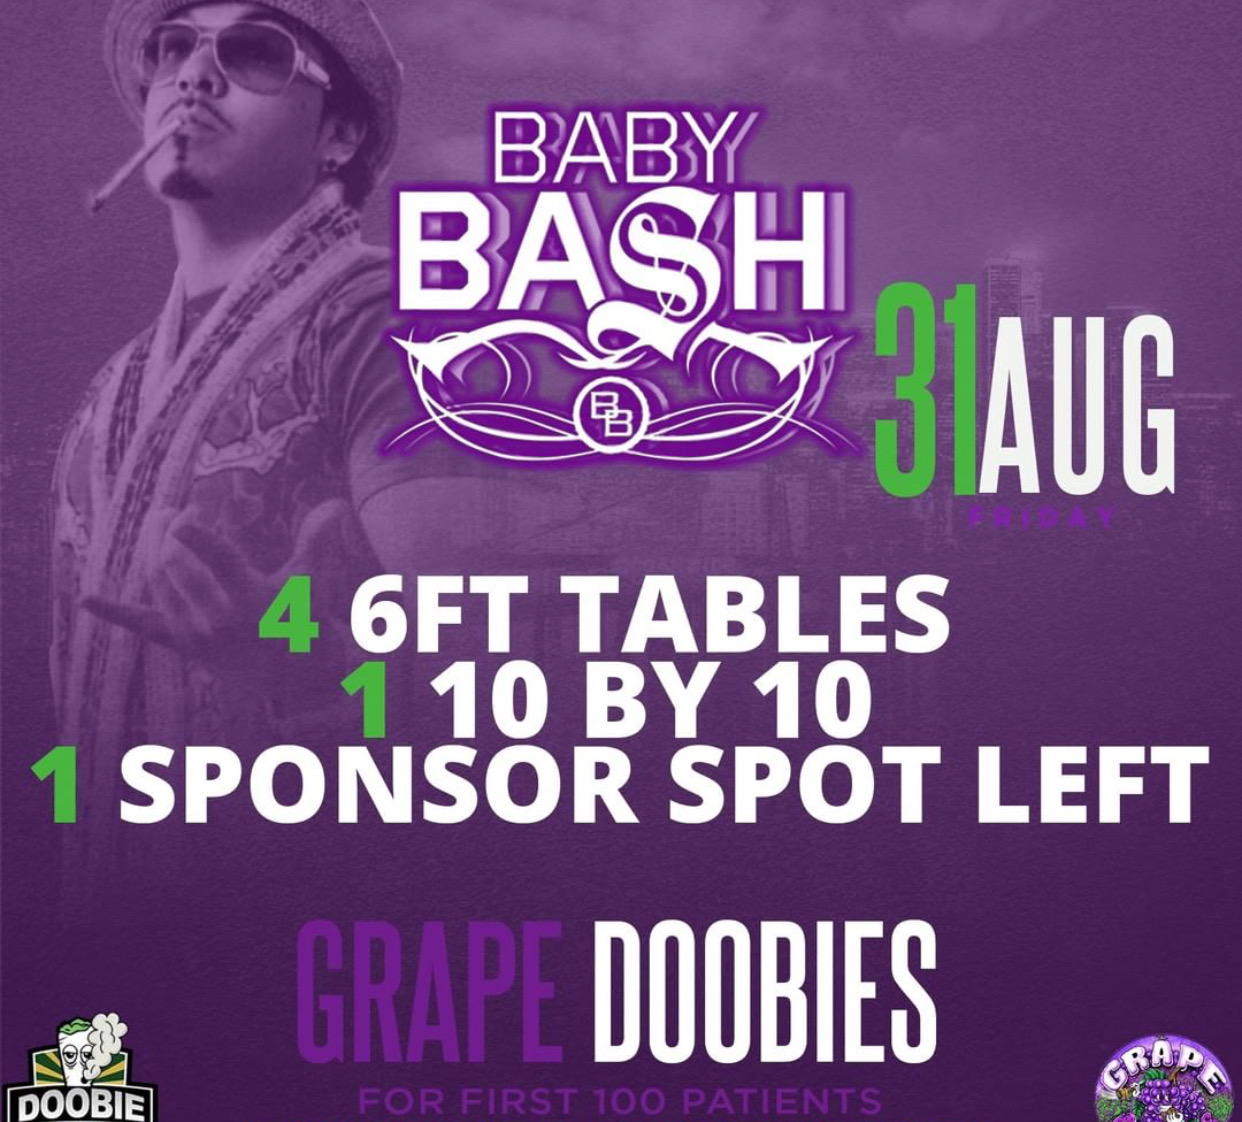 Baby Bash Live at the Doobie Sesh This Friday!